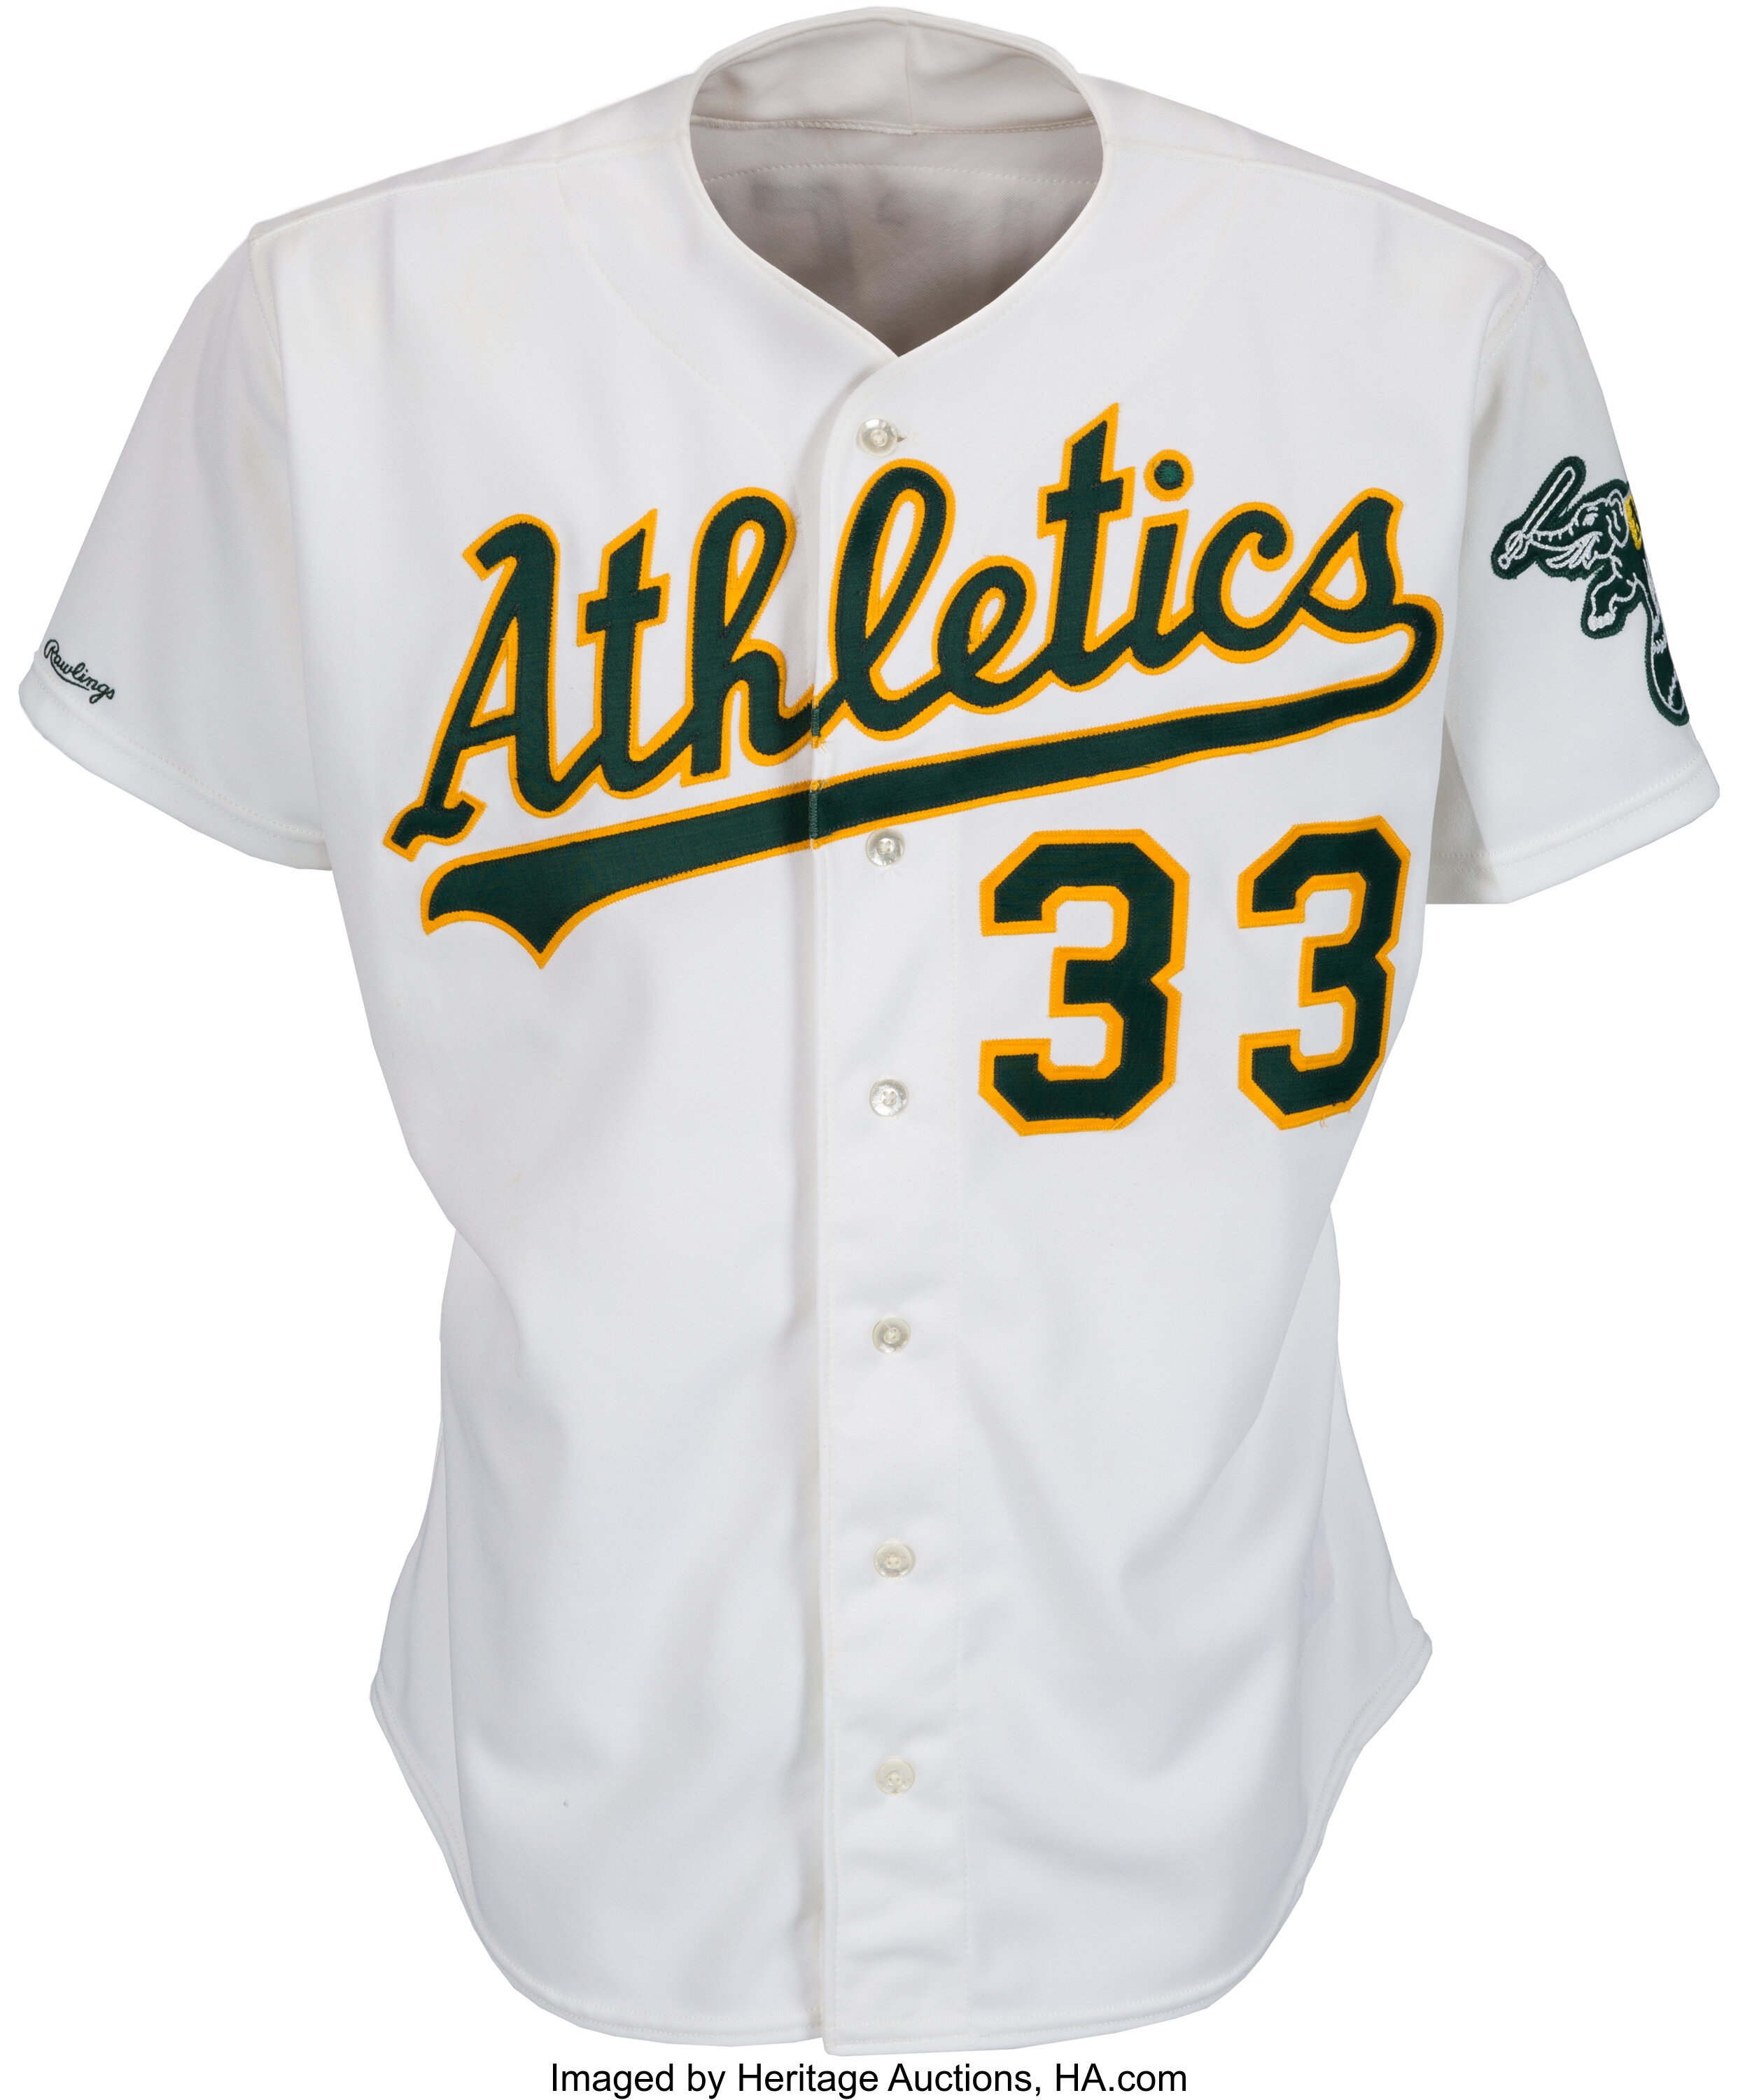 Authentic Jose Canseco Oakland Athletics 1990 Pullover Jersey